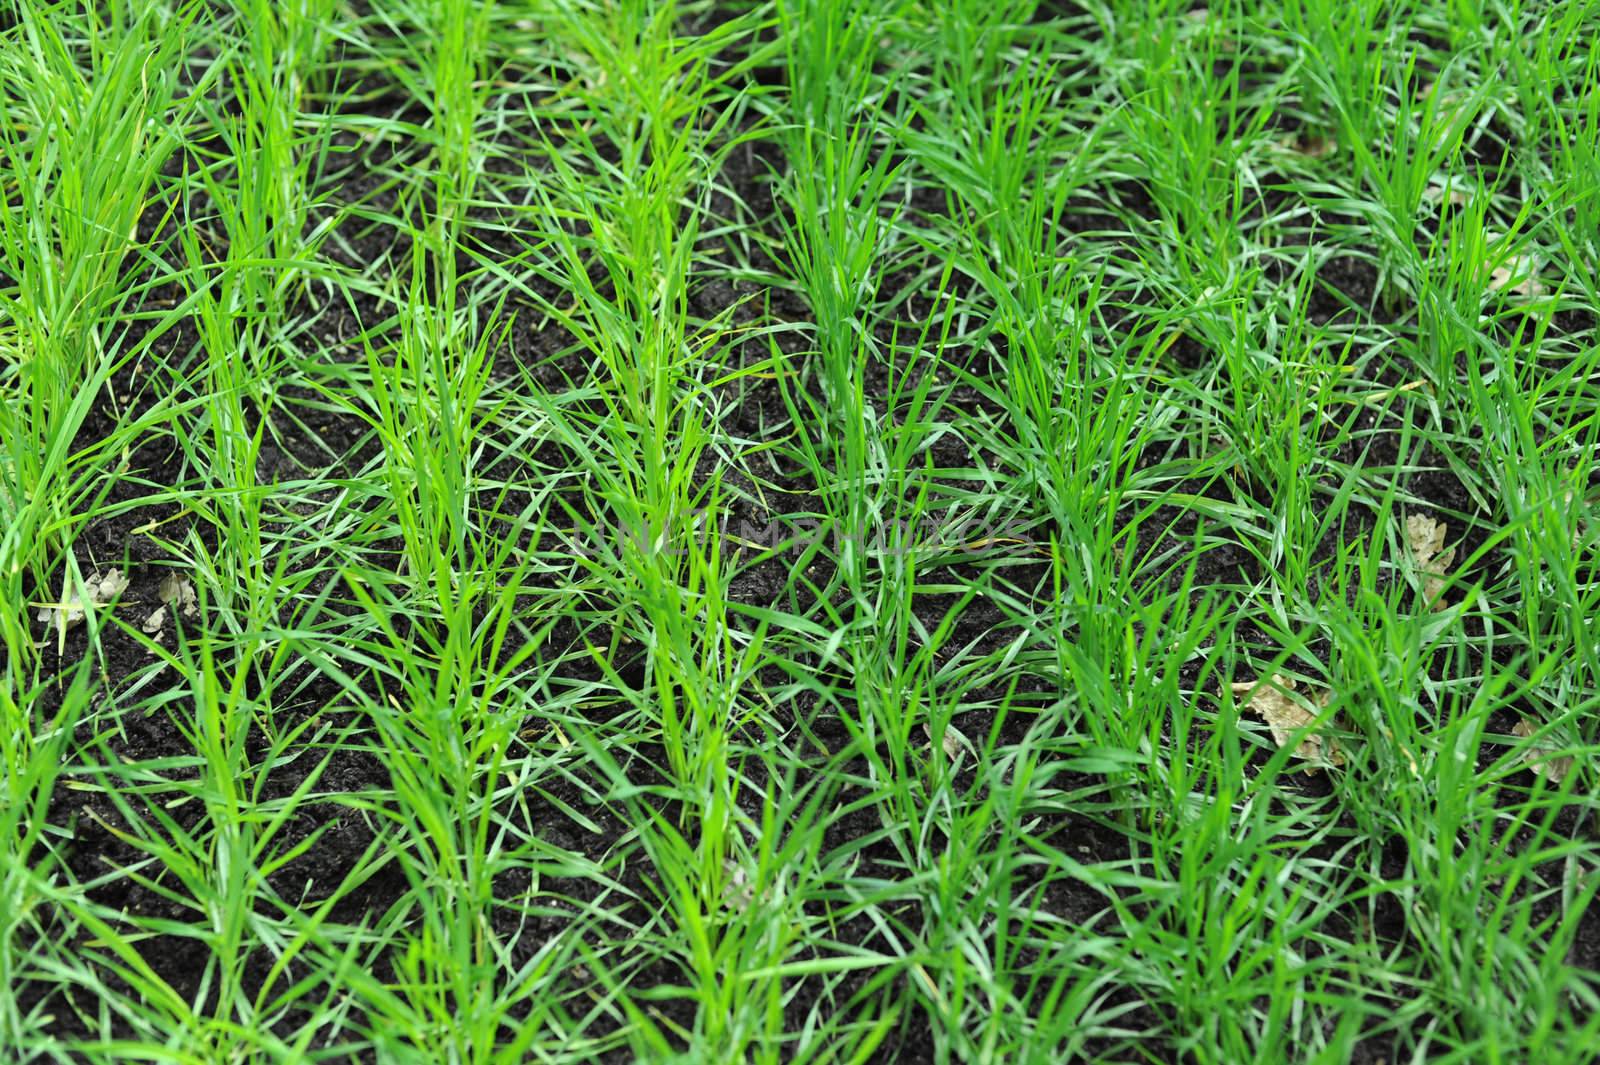 Green sprouts of cultivated wheat growing in the field in spring.